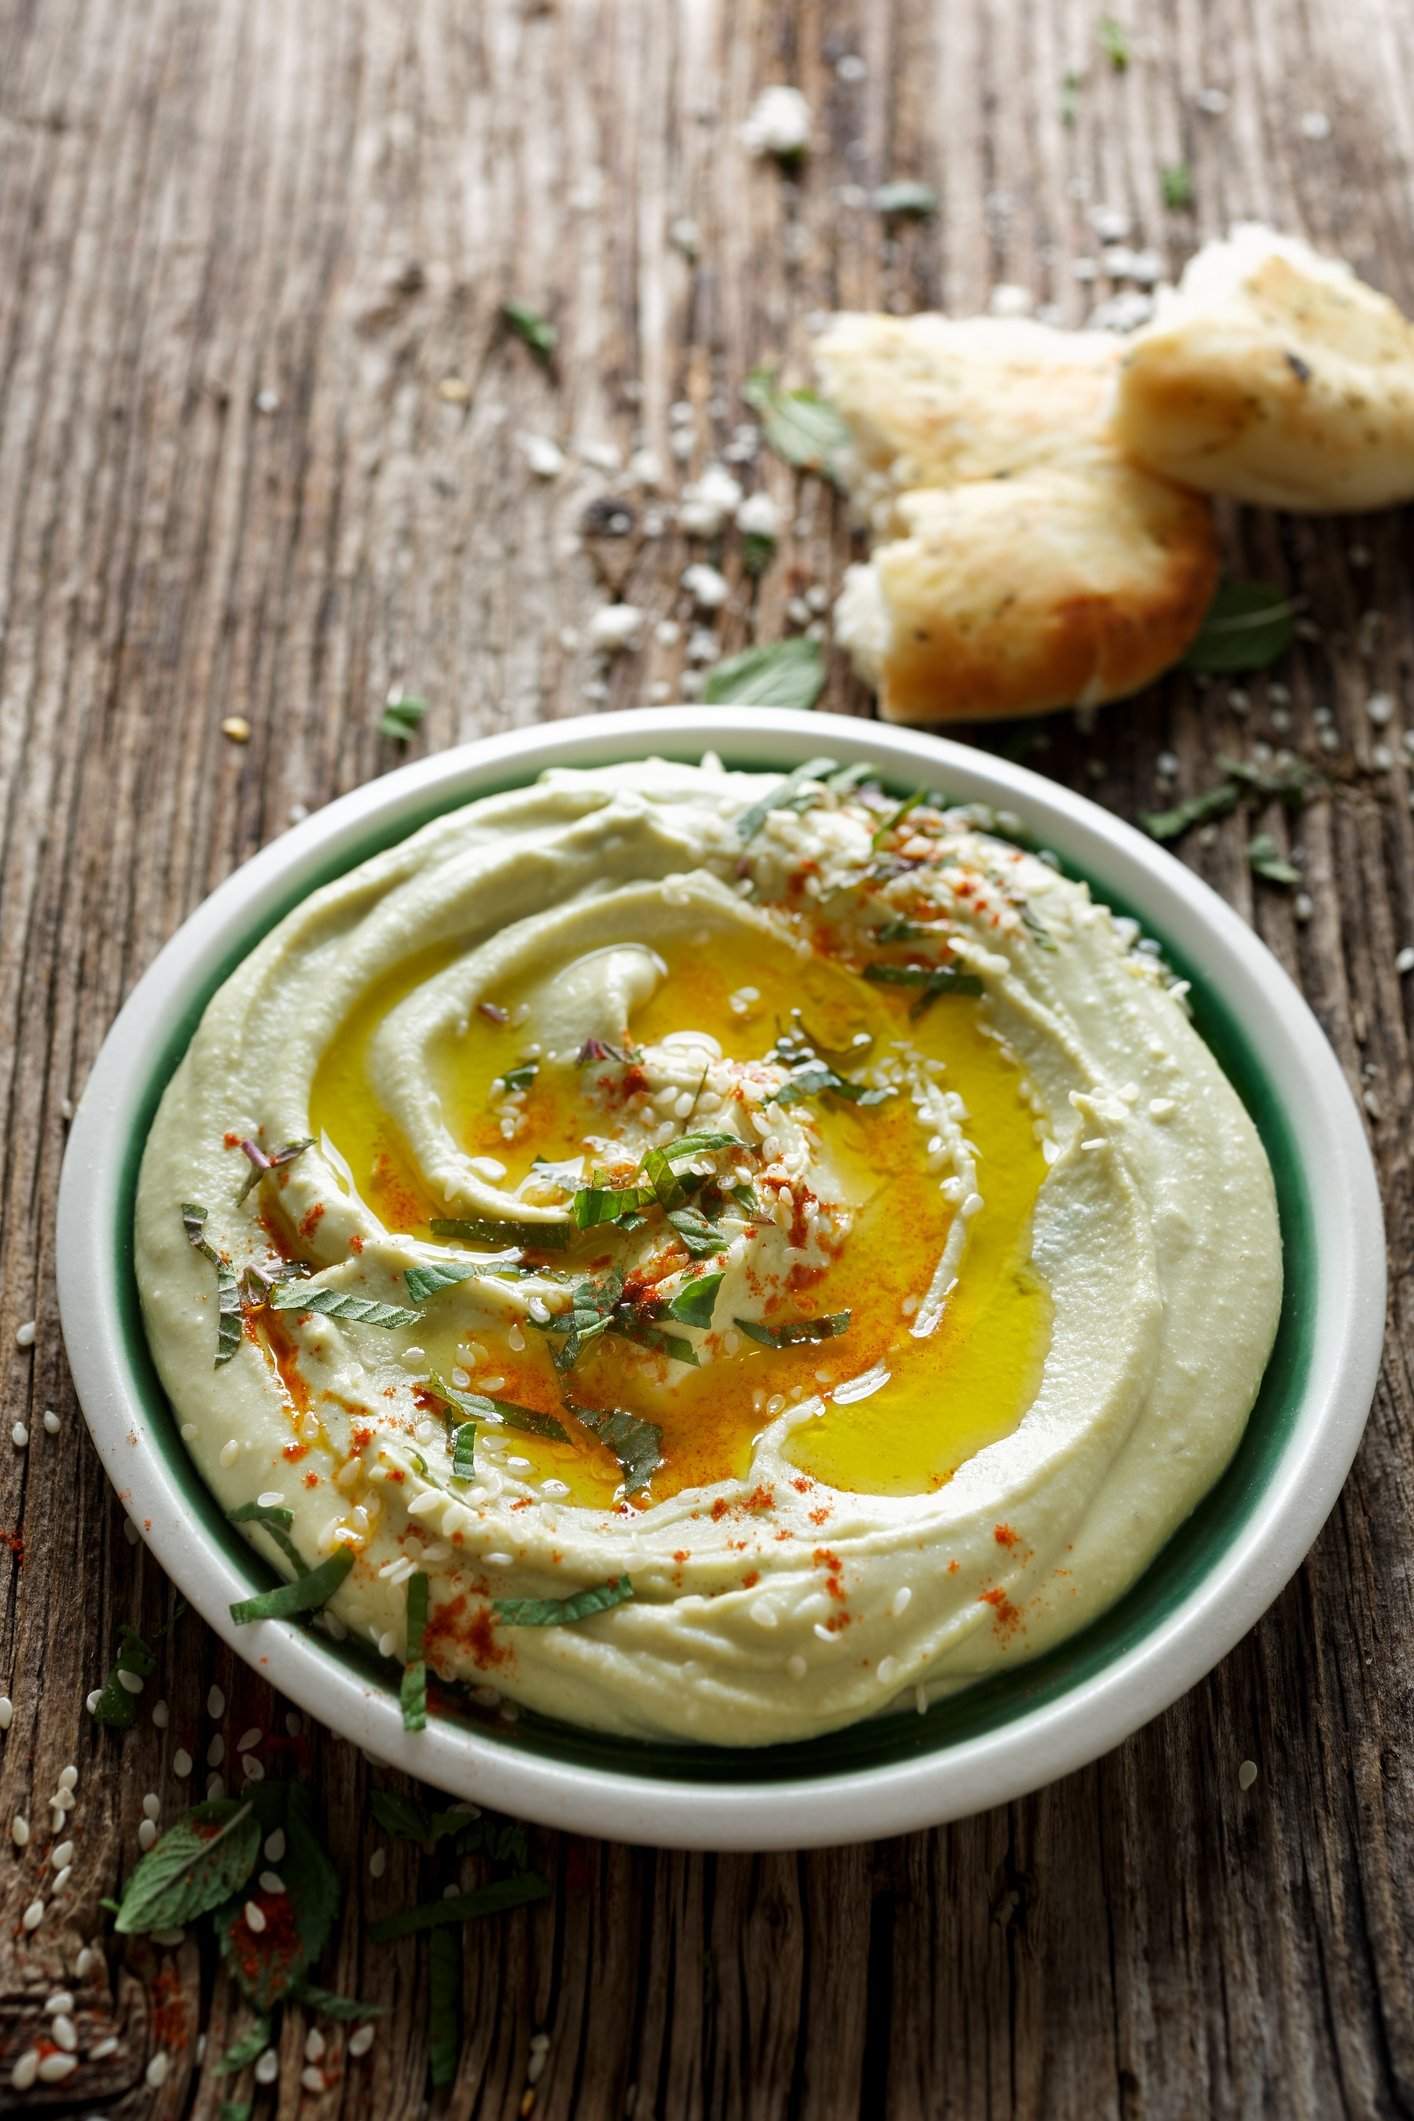 Fava is a type of broad bean hummus. (iStock Photo)